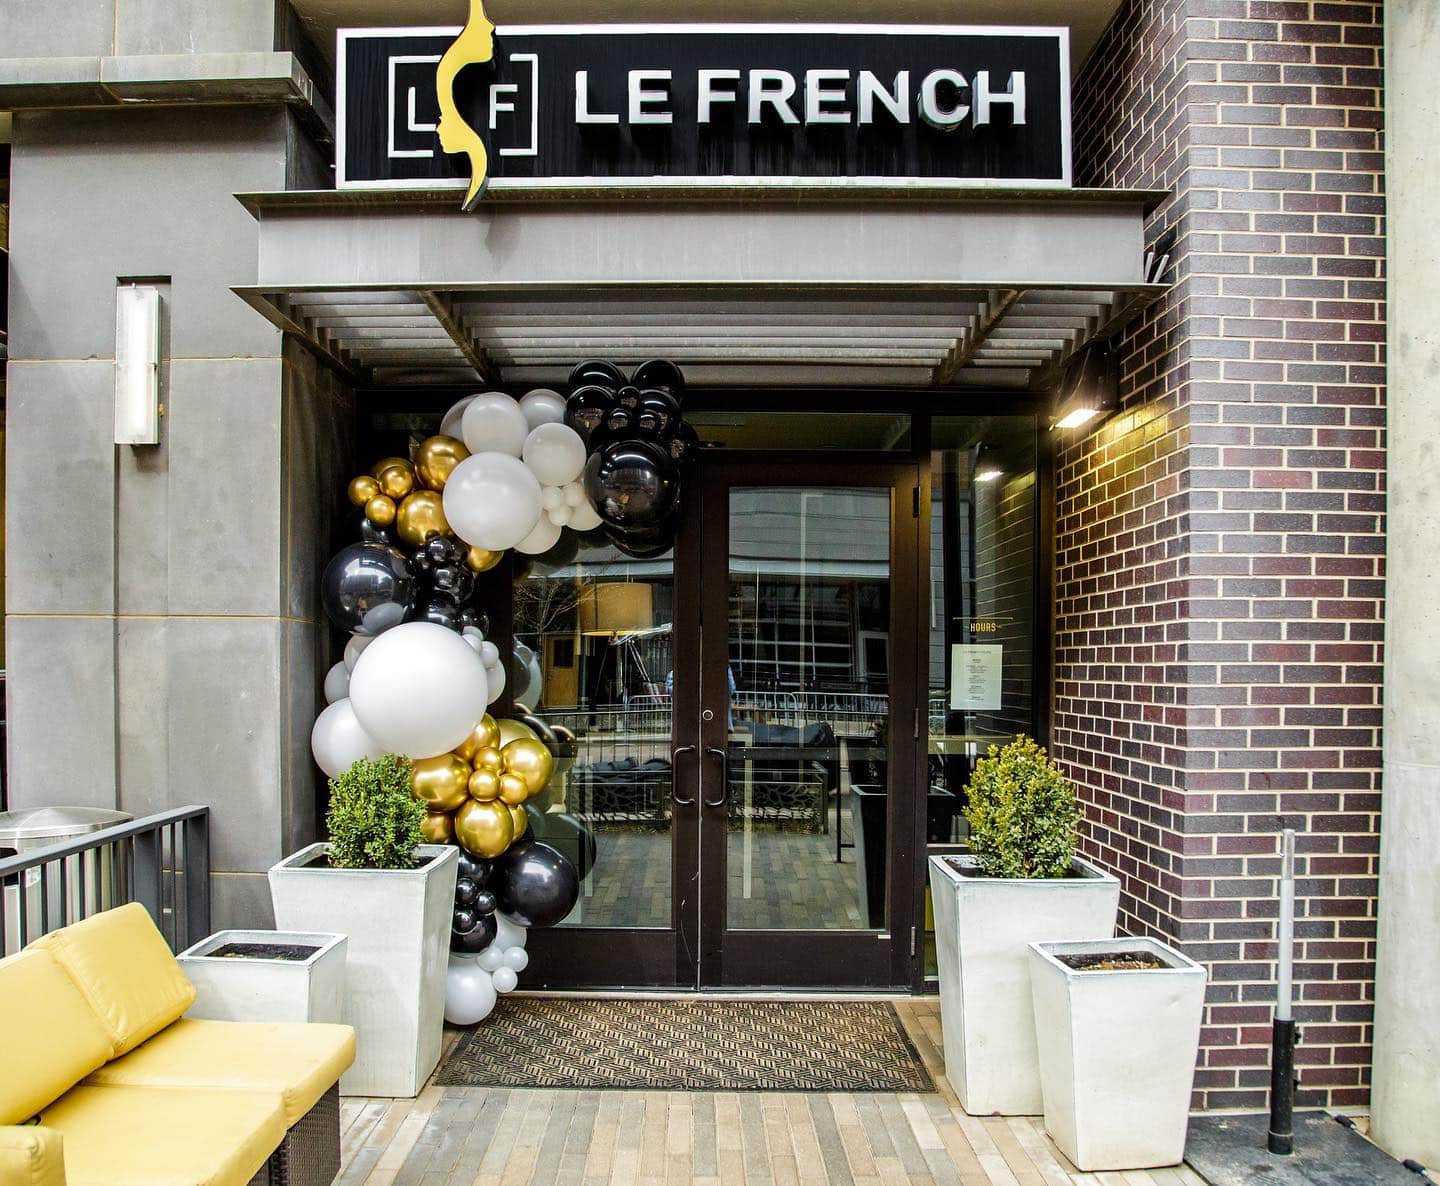 LeFrench outside